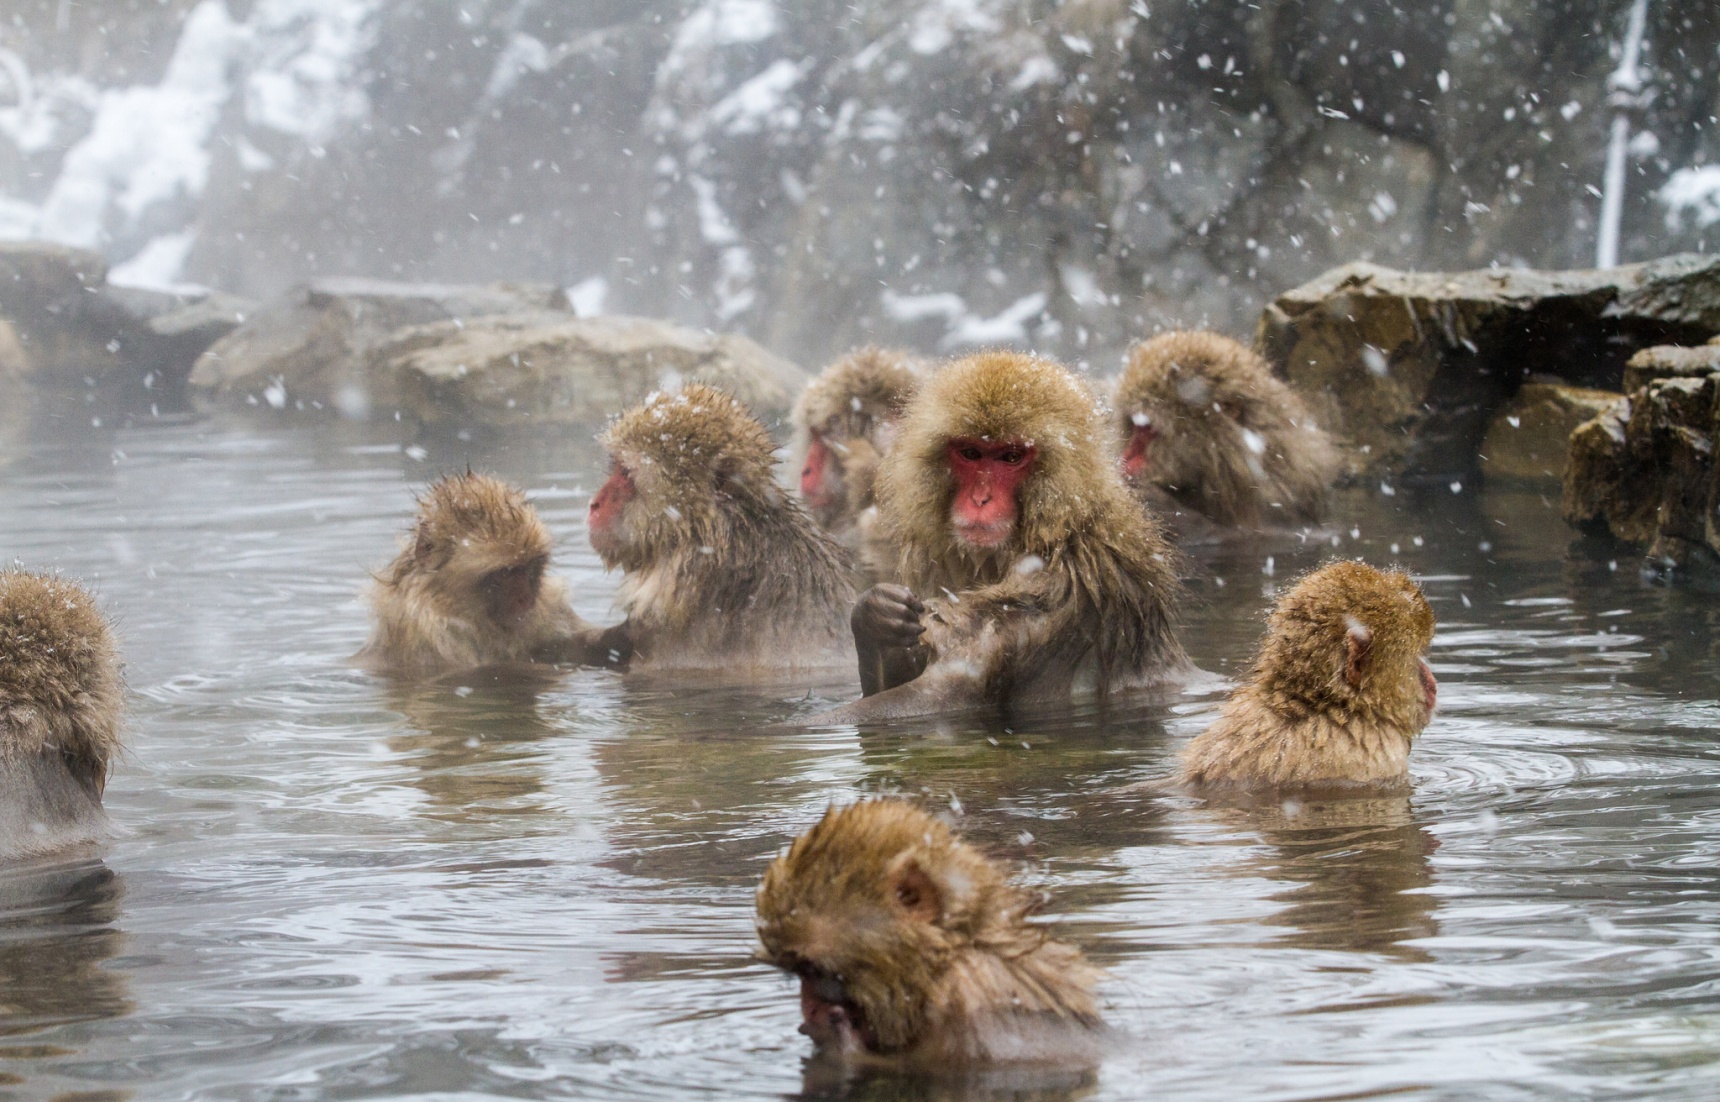 The Top 11 Hot Spring Hot Spots in Japan!